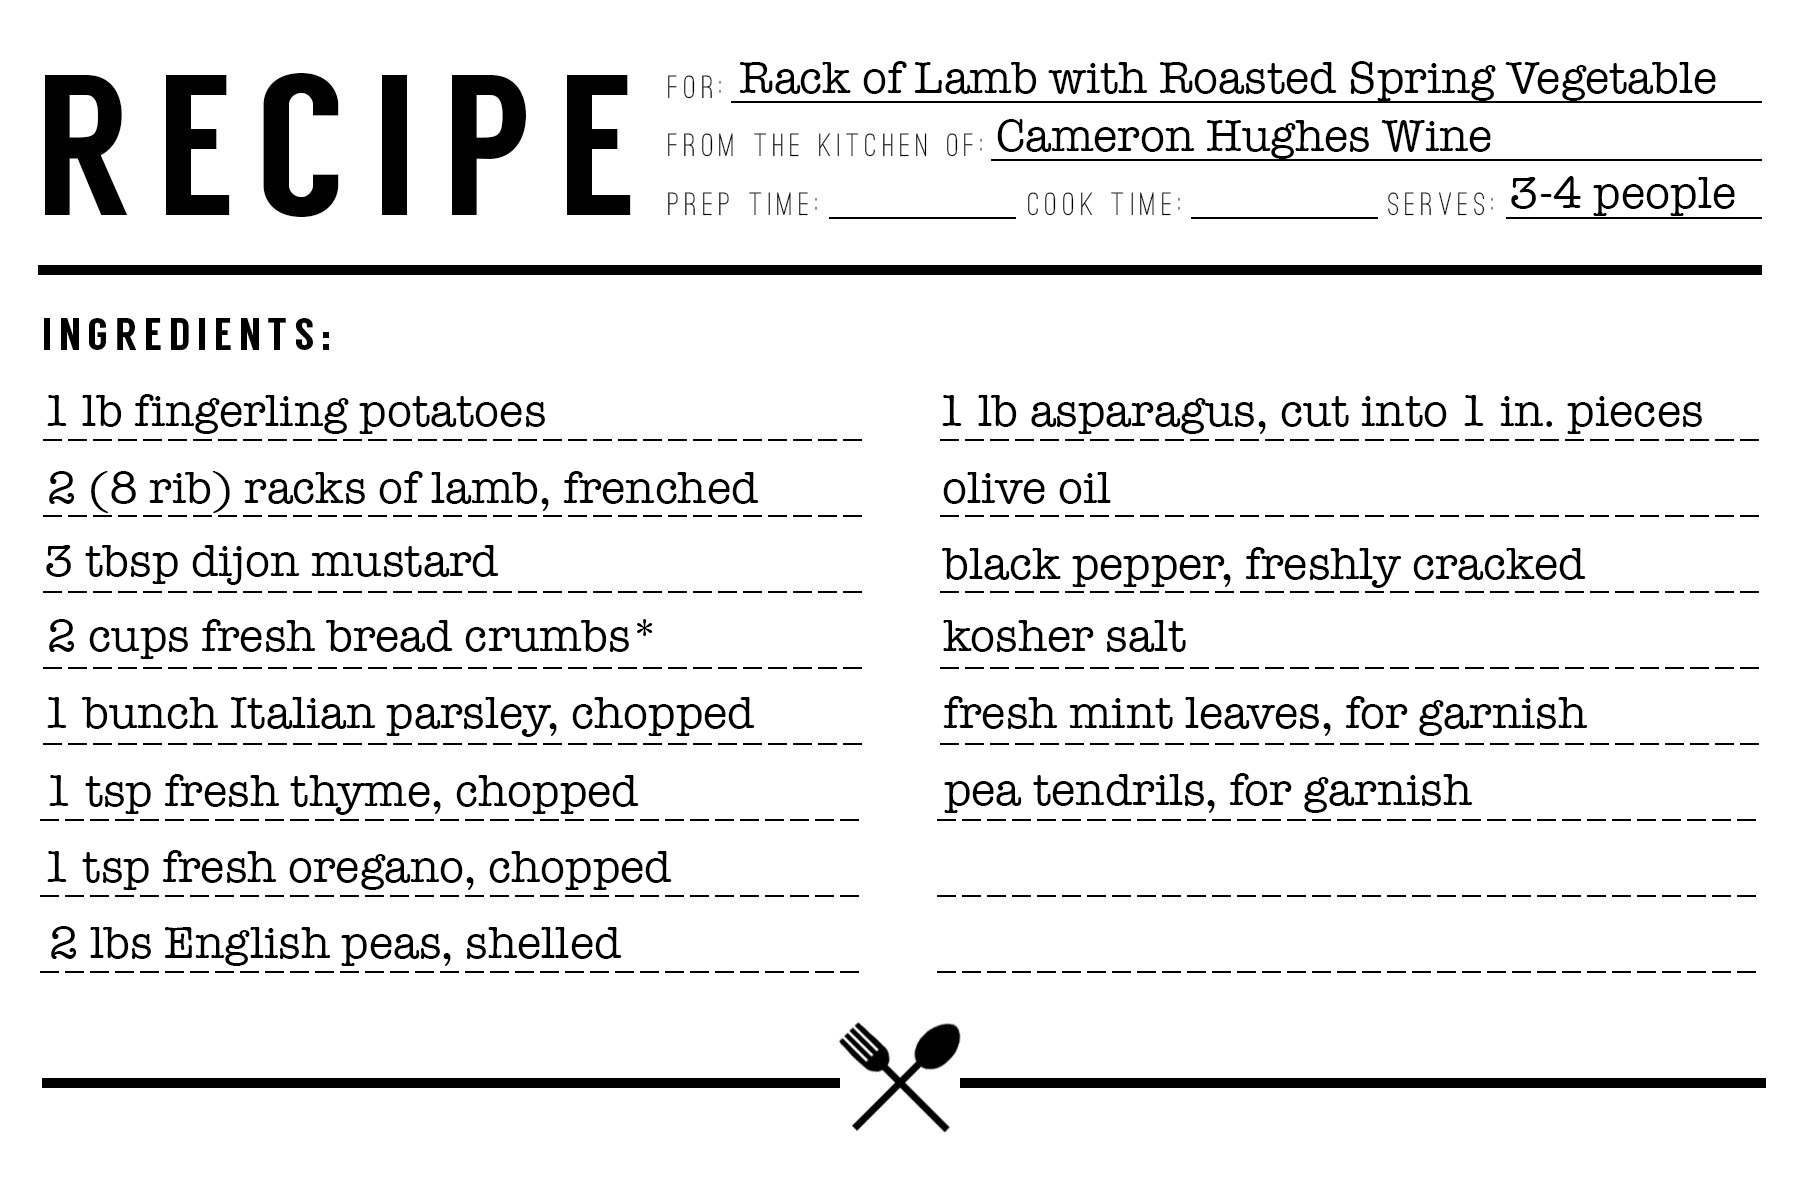 Recipe Index Card for Rack of Lamb with Roasted Spring Vegetable